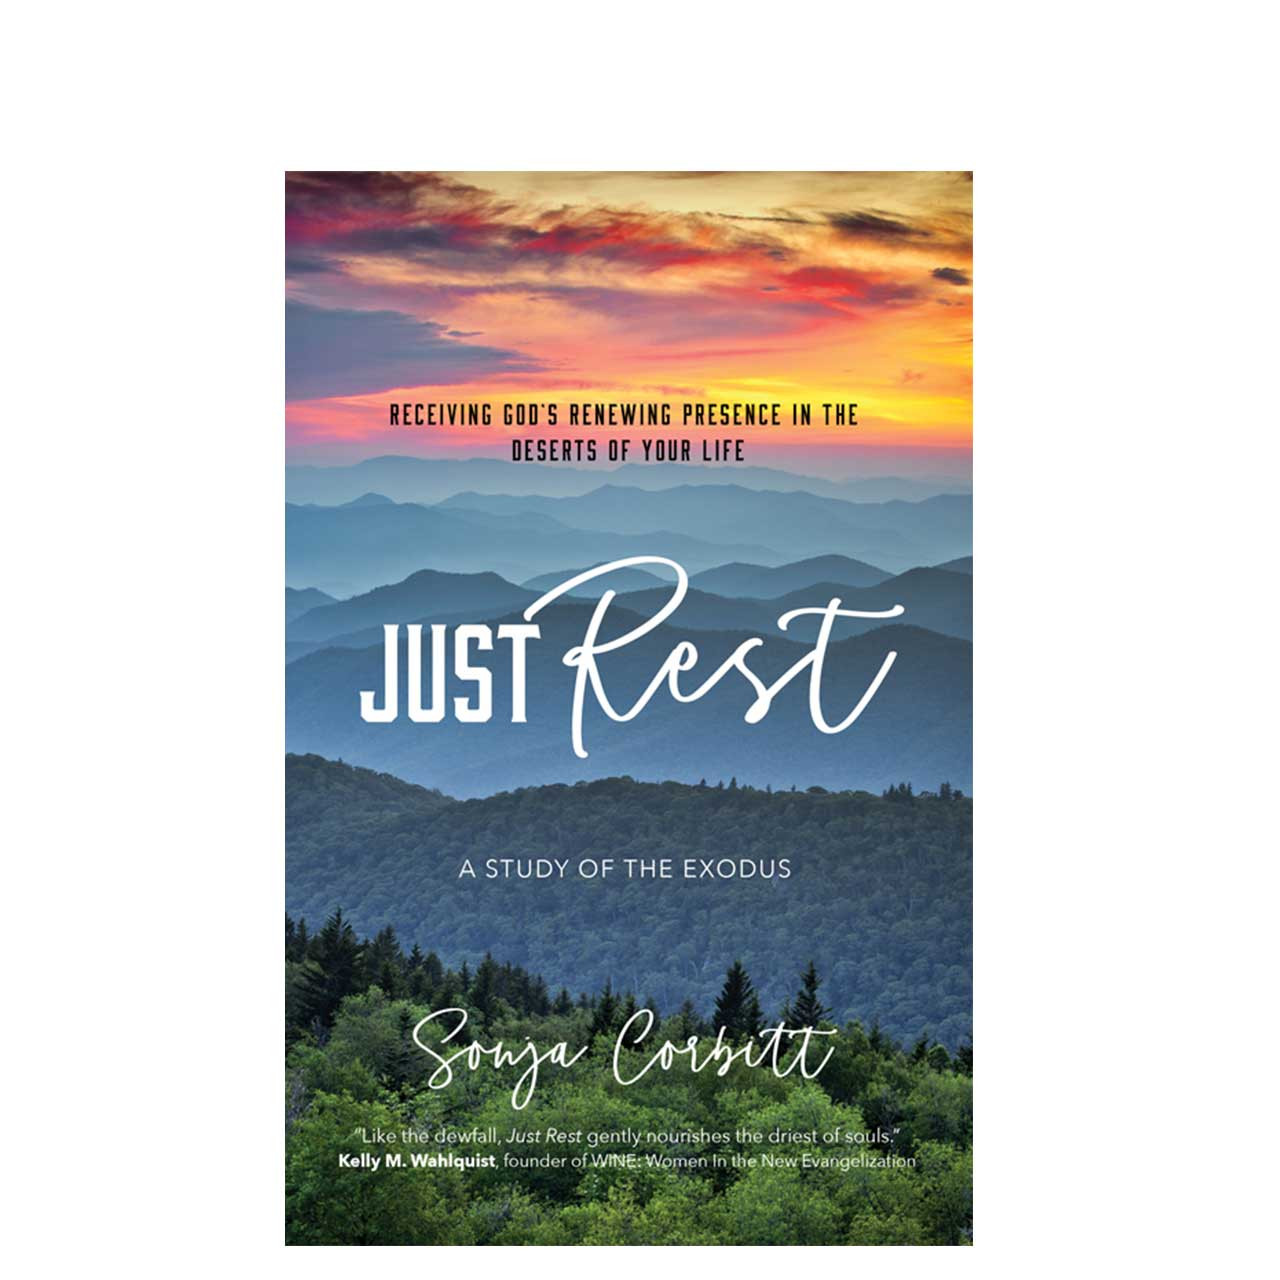 Just Rest: Receiving God's Presence in the Deserts of Your Life by Sonja Corbitt